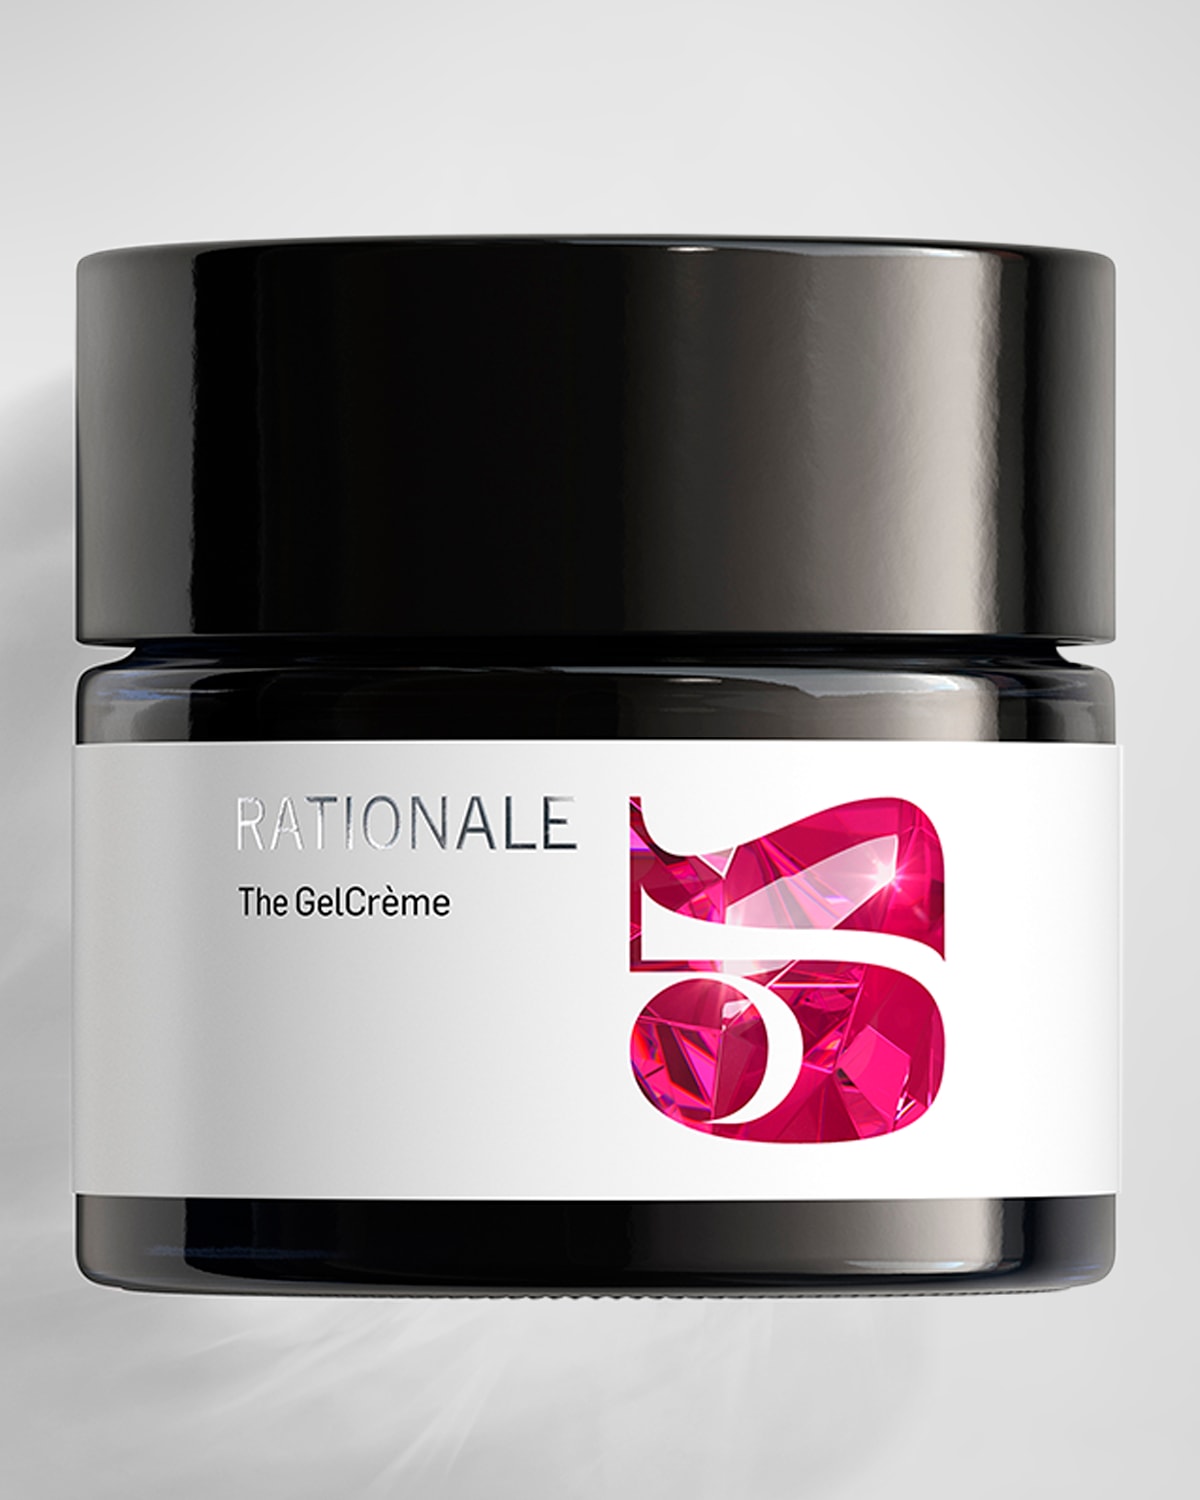 #6 The GelCreme, 1.7 oz.